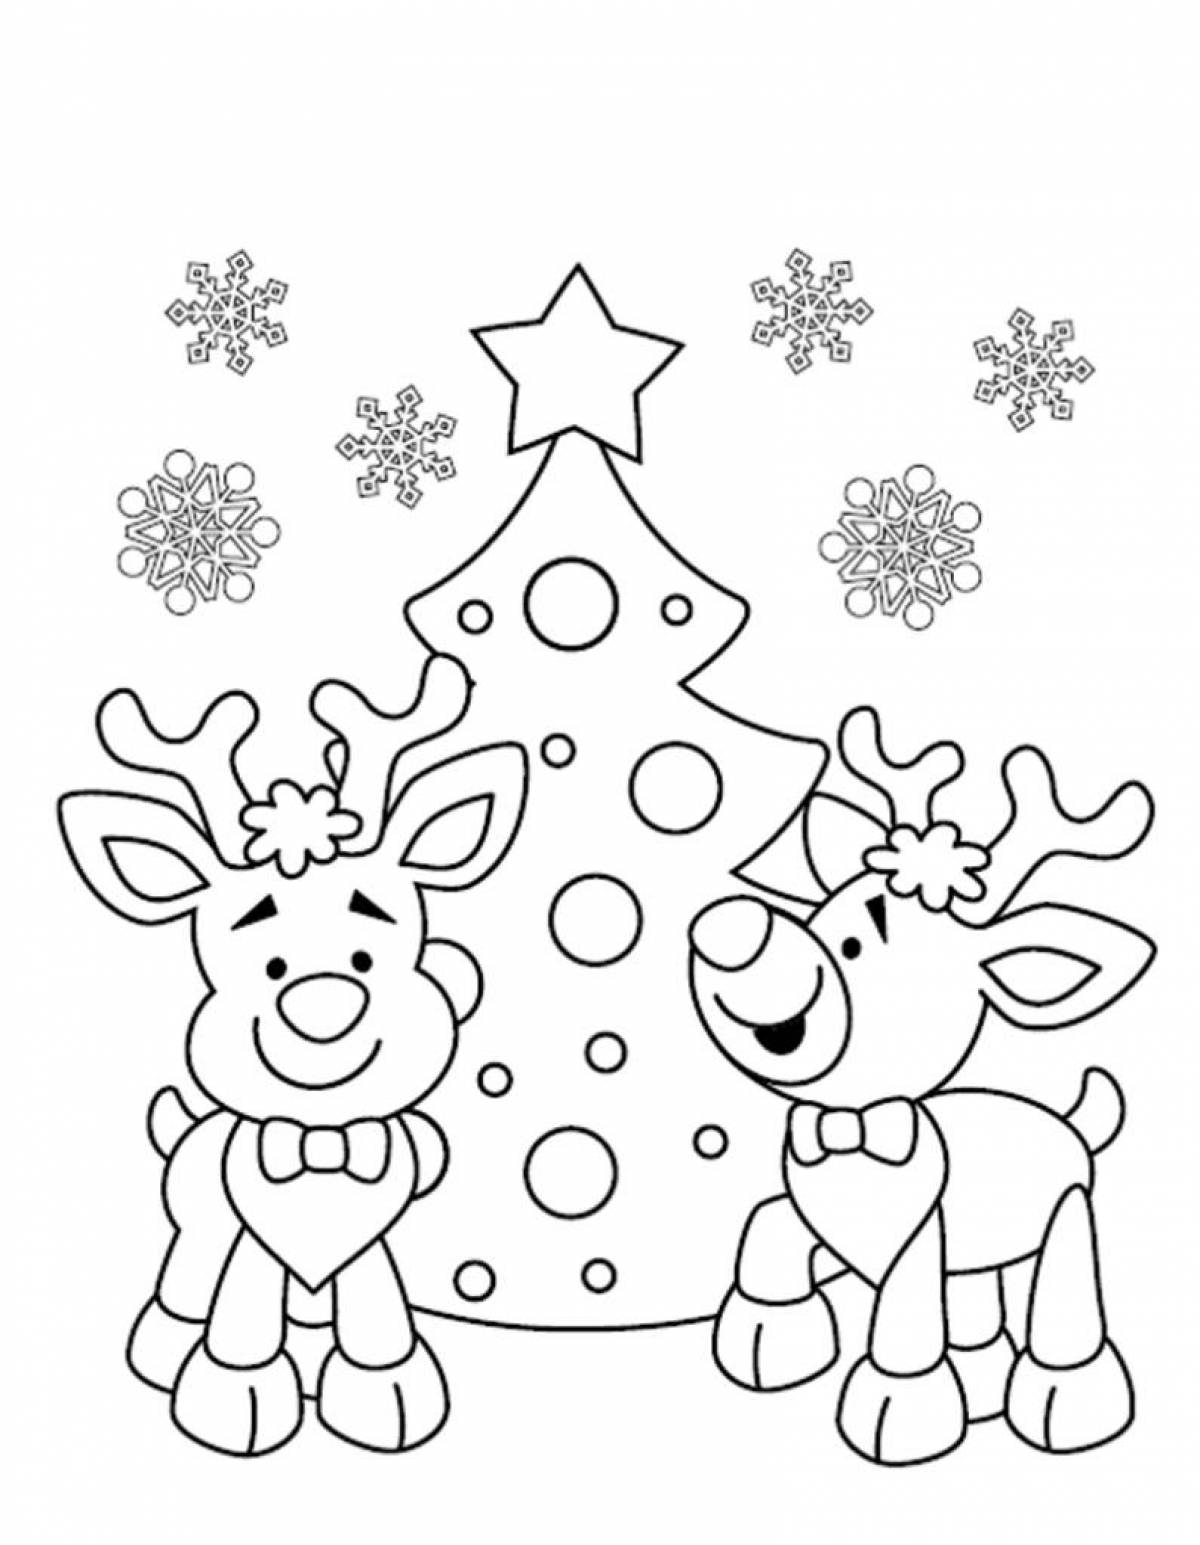 A refreshing Christmas coloring book for 3-4 year olds